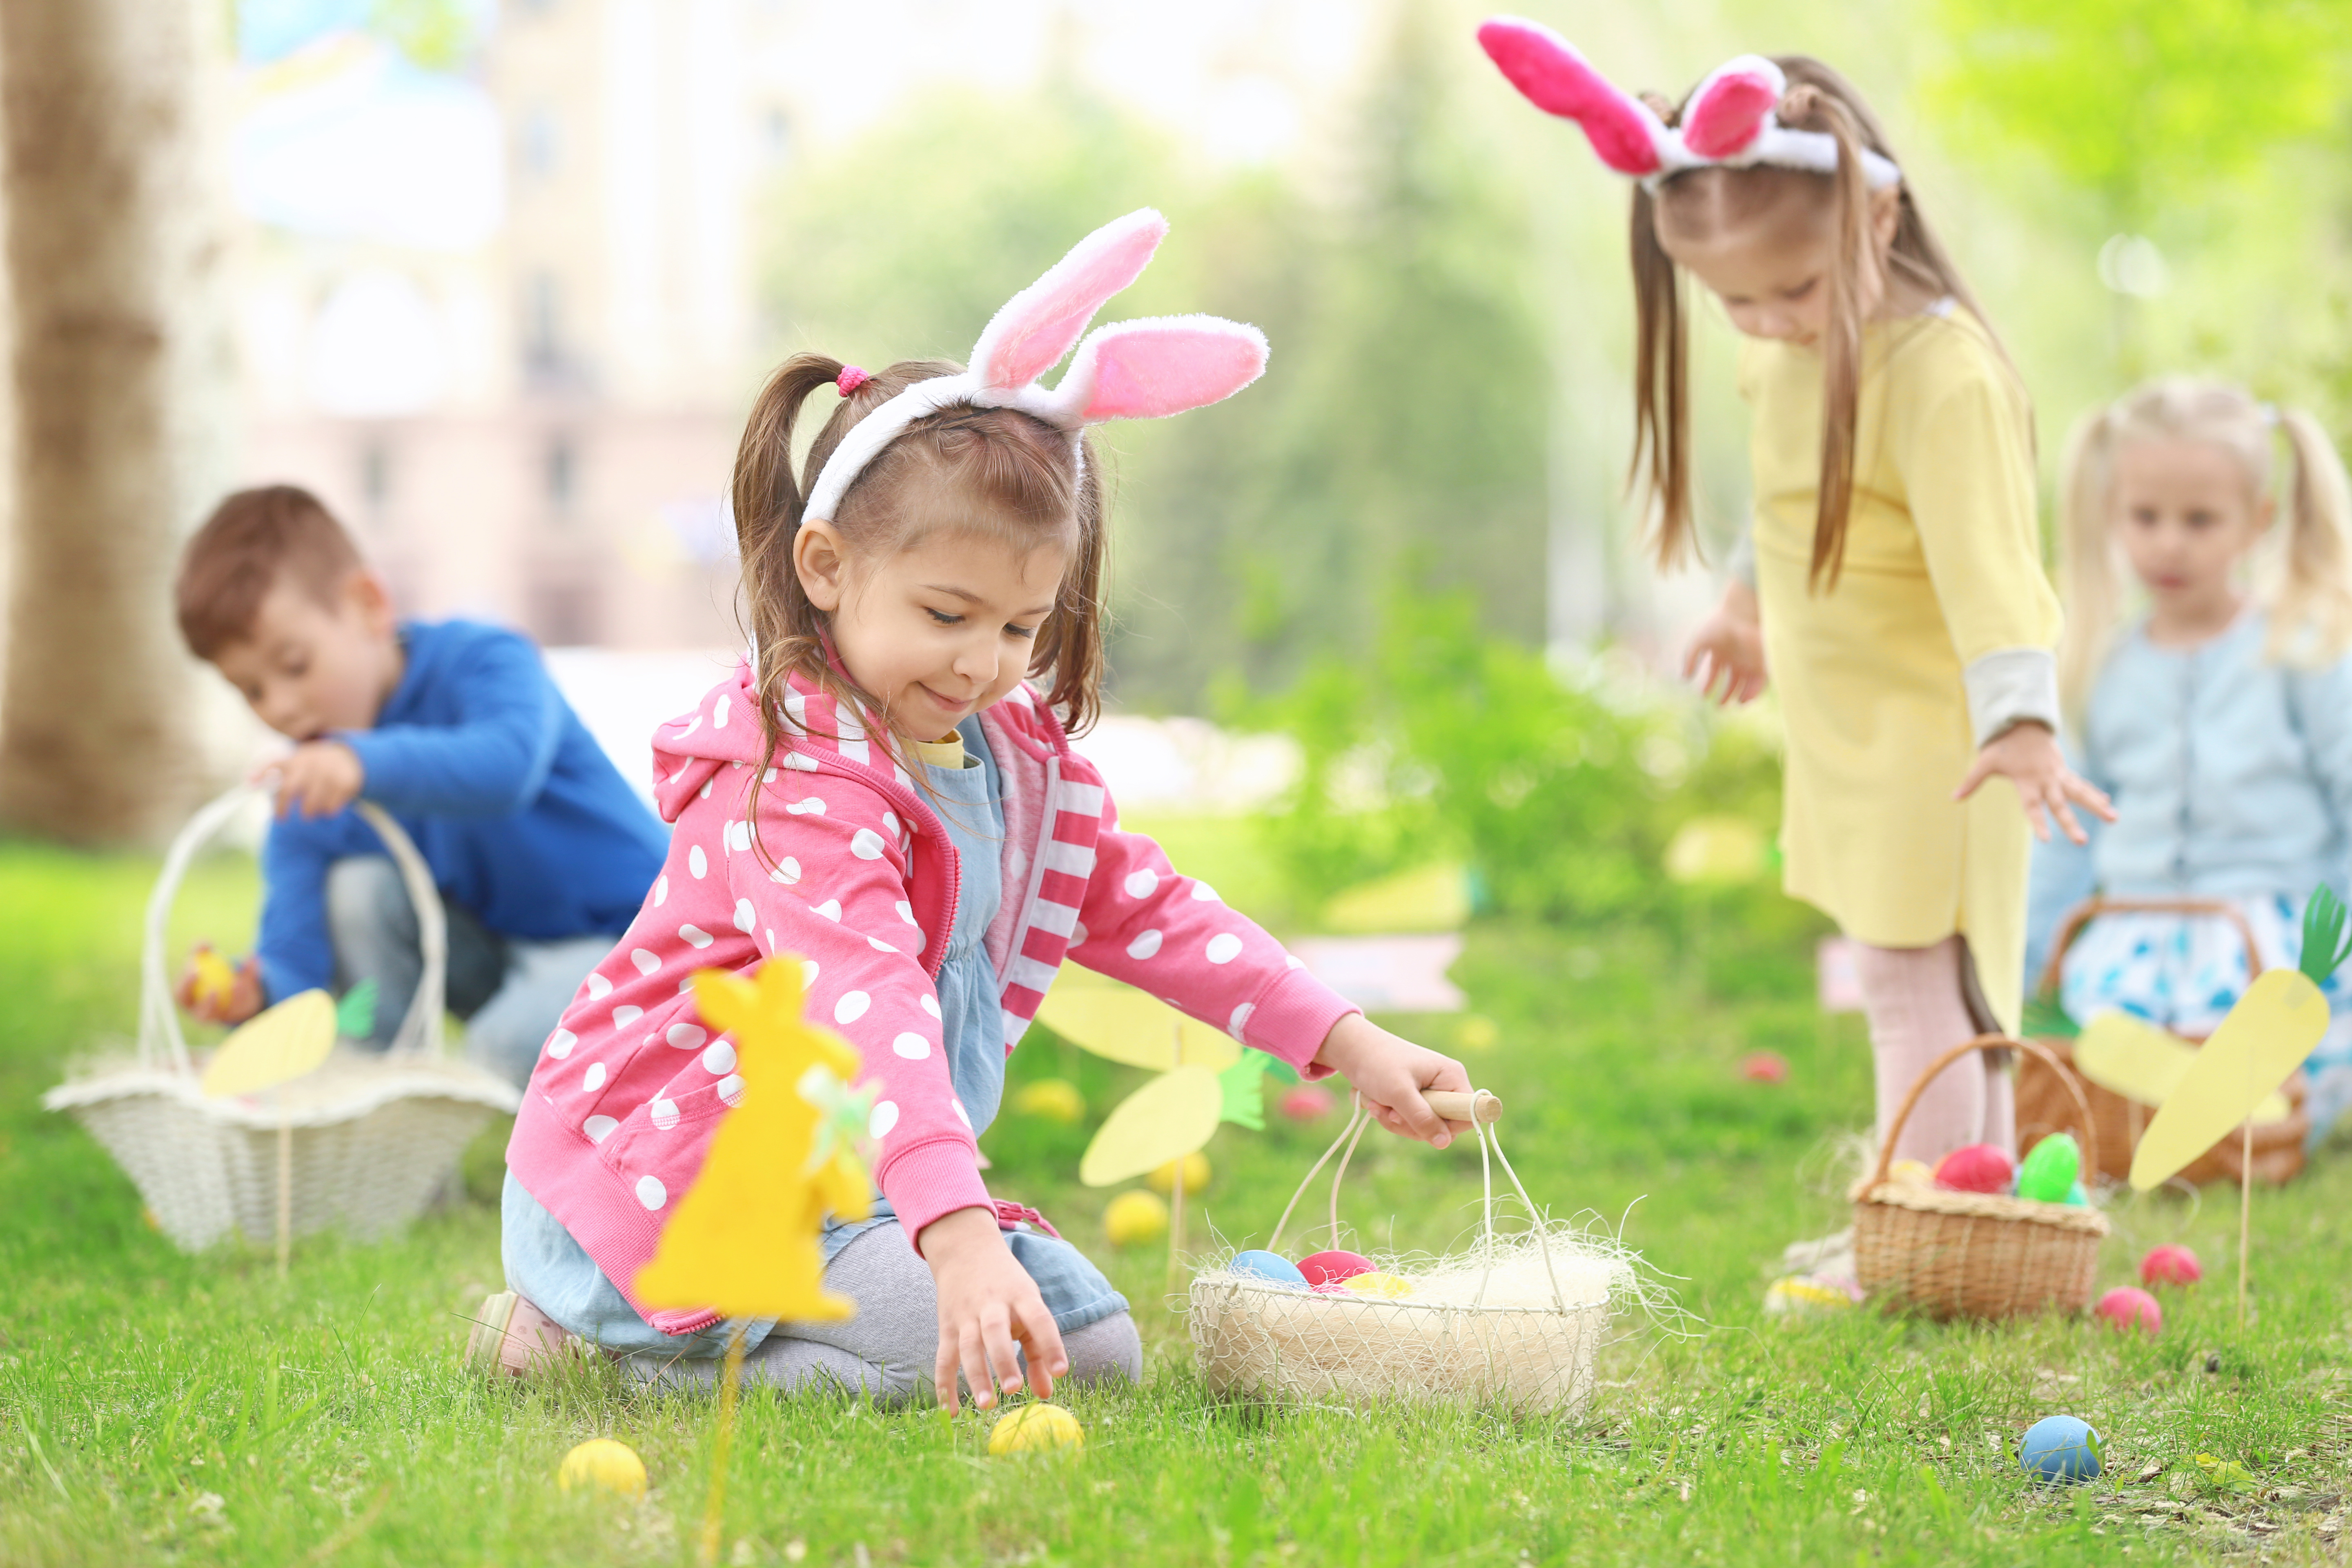 Westfield HOA Easter Event - April 8th